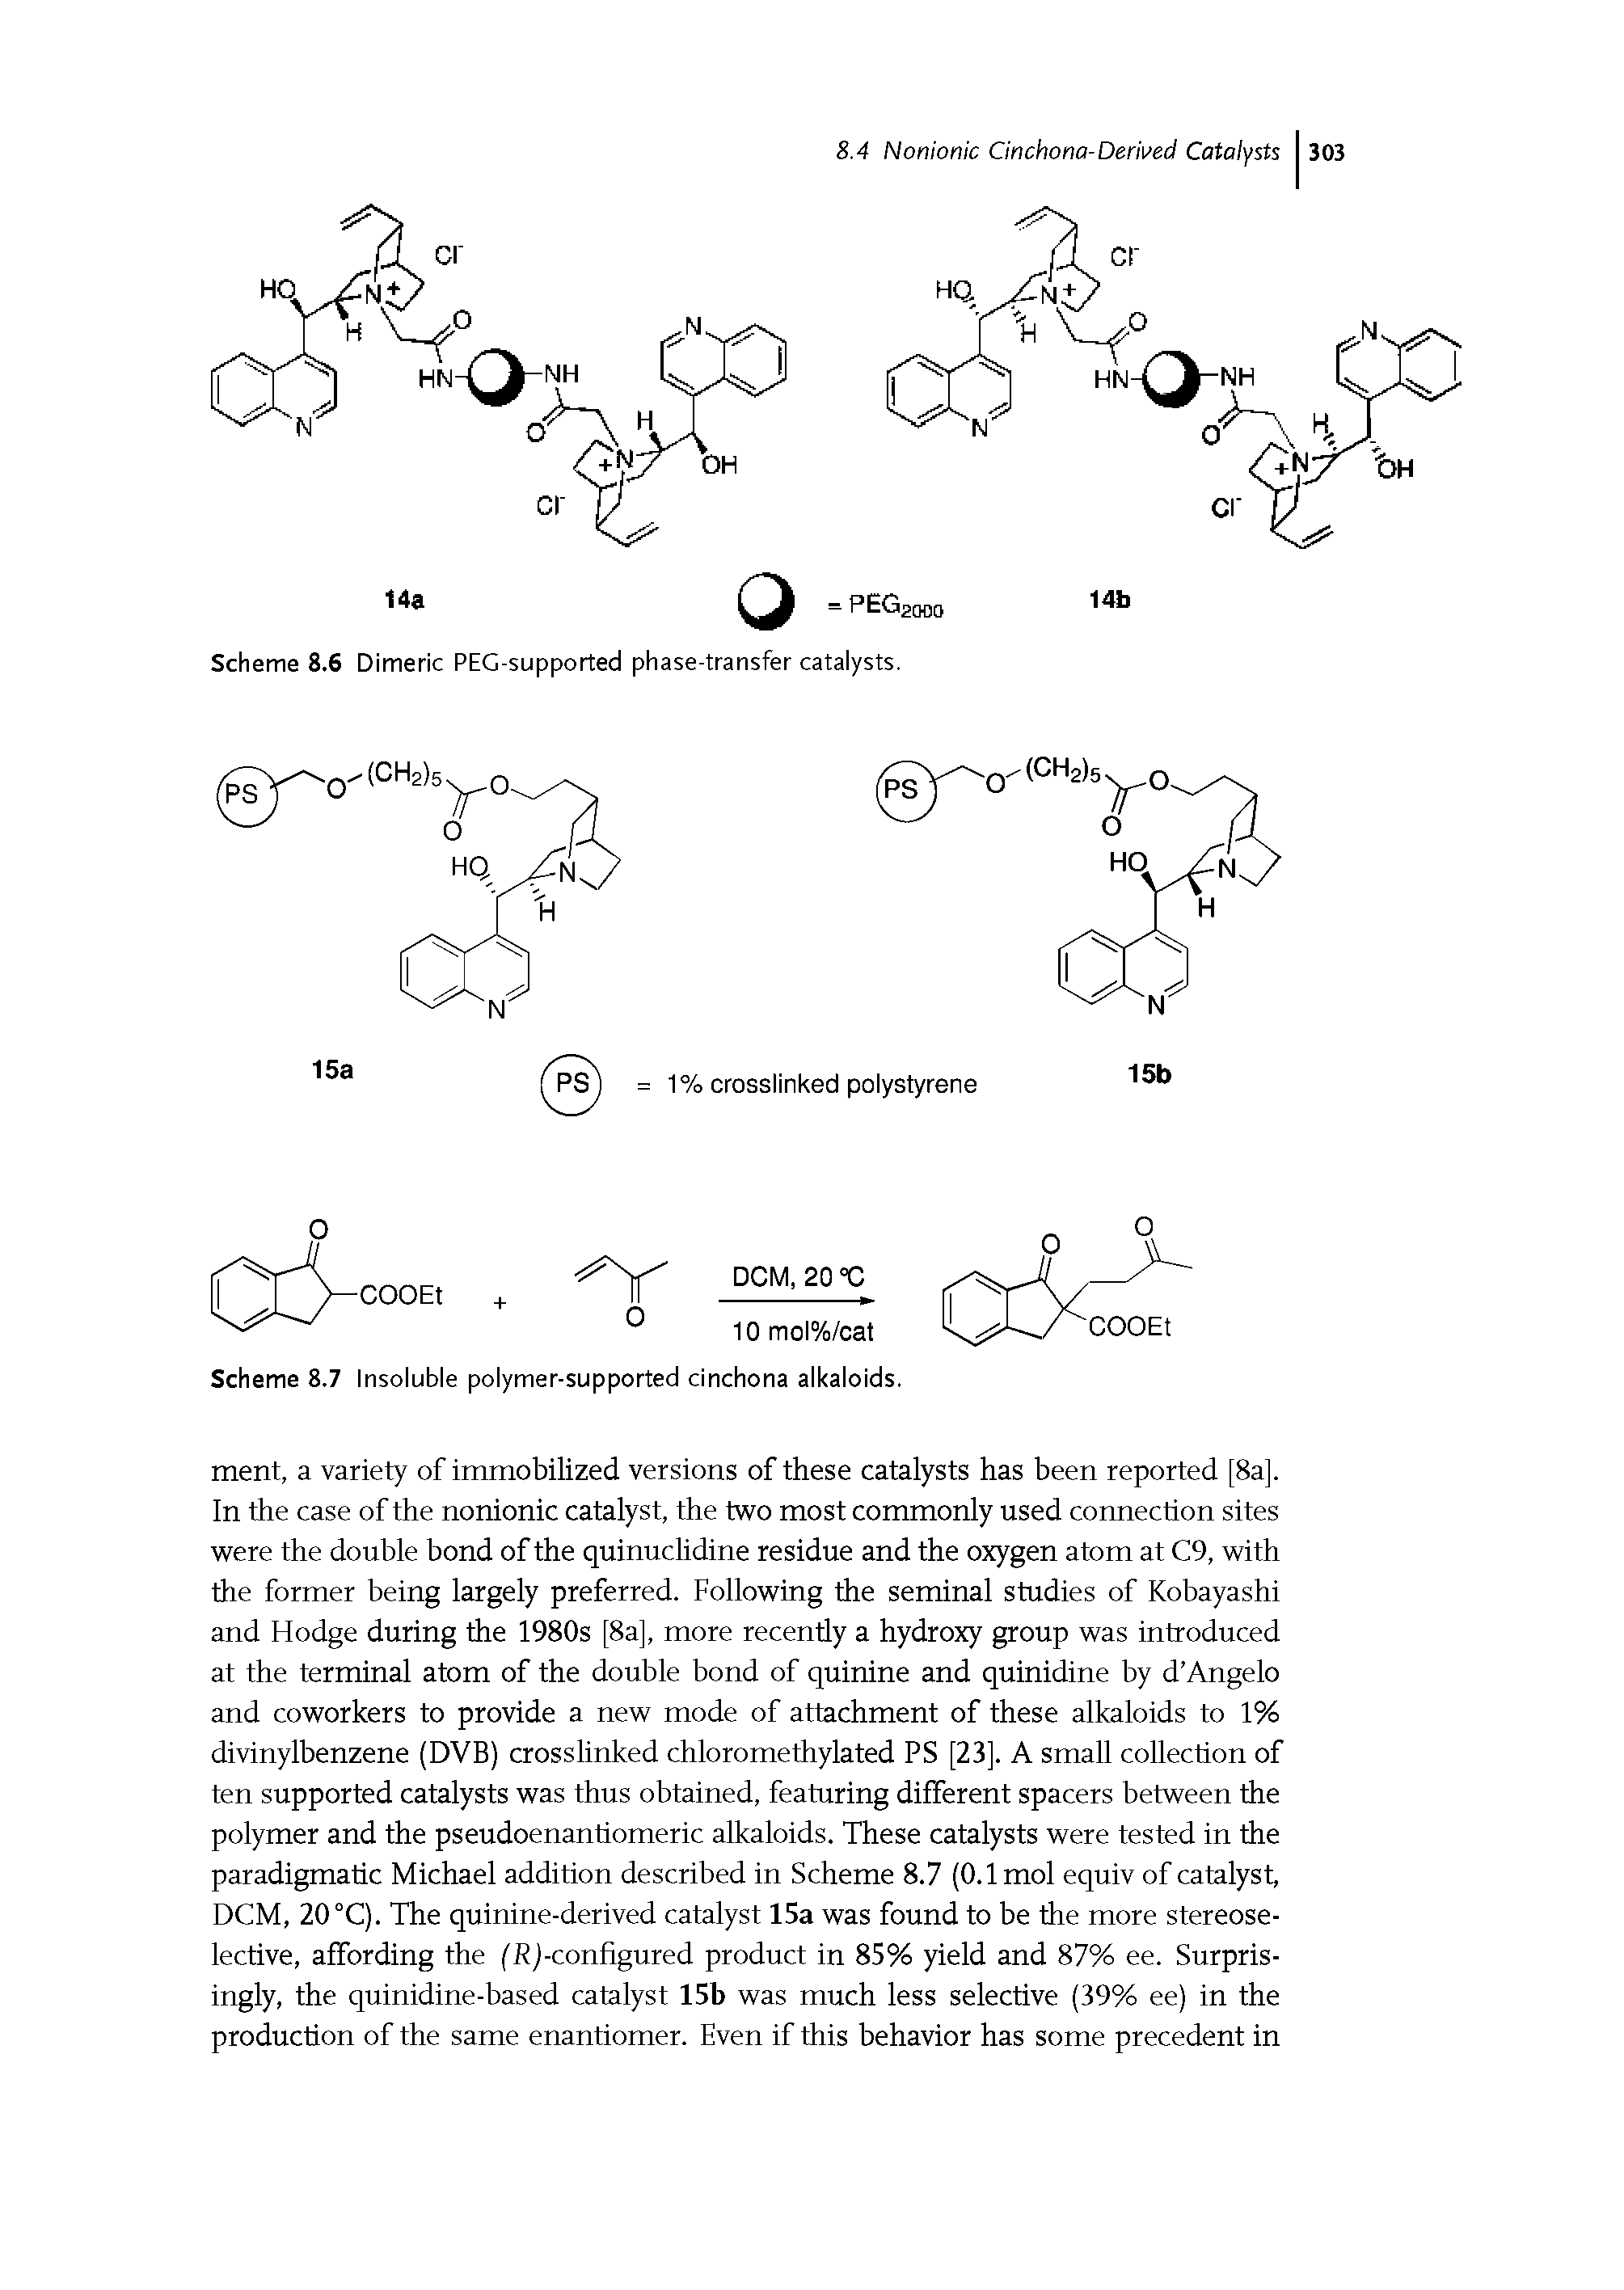 Scheme 8.7 Insoluble polymer-supported cinchona alkaloids.